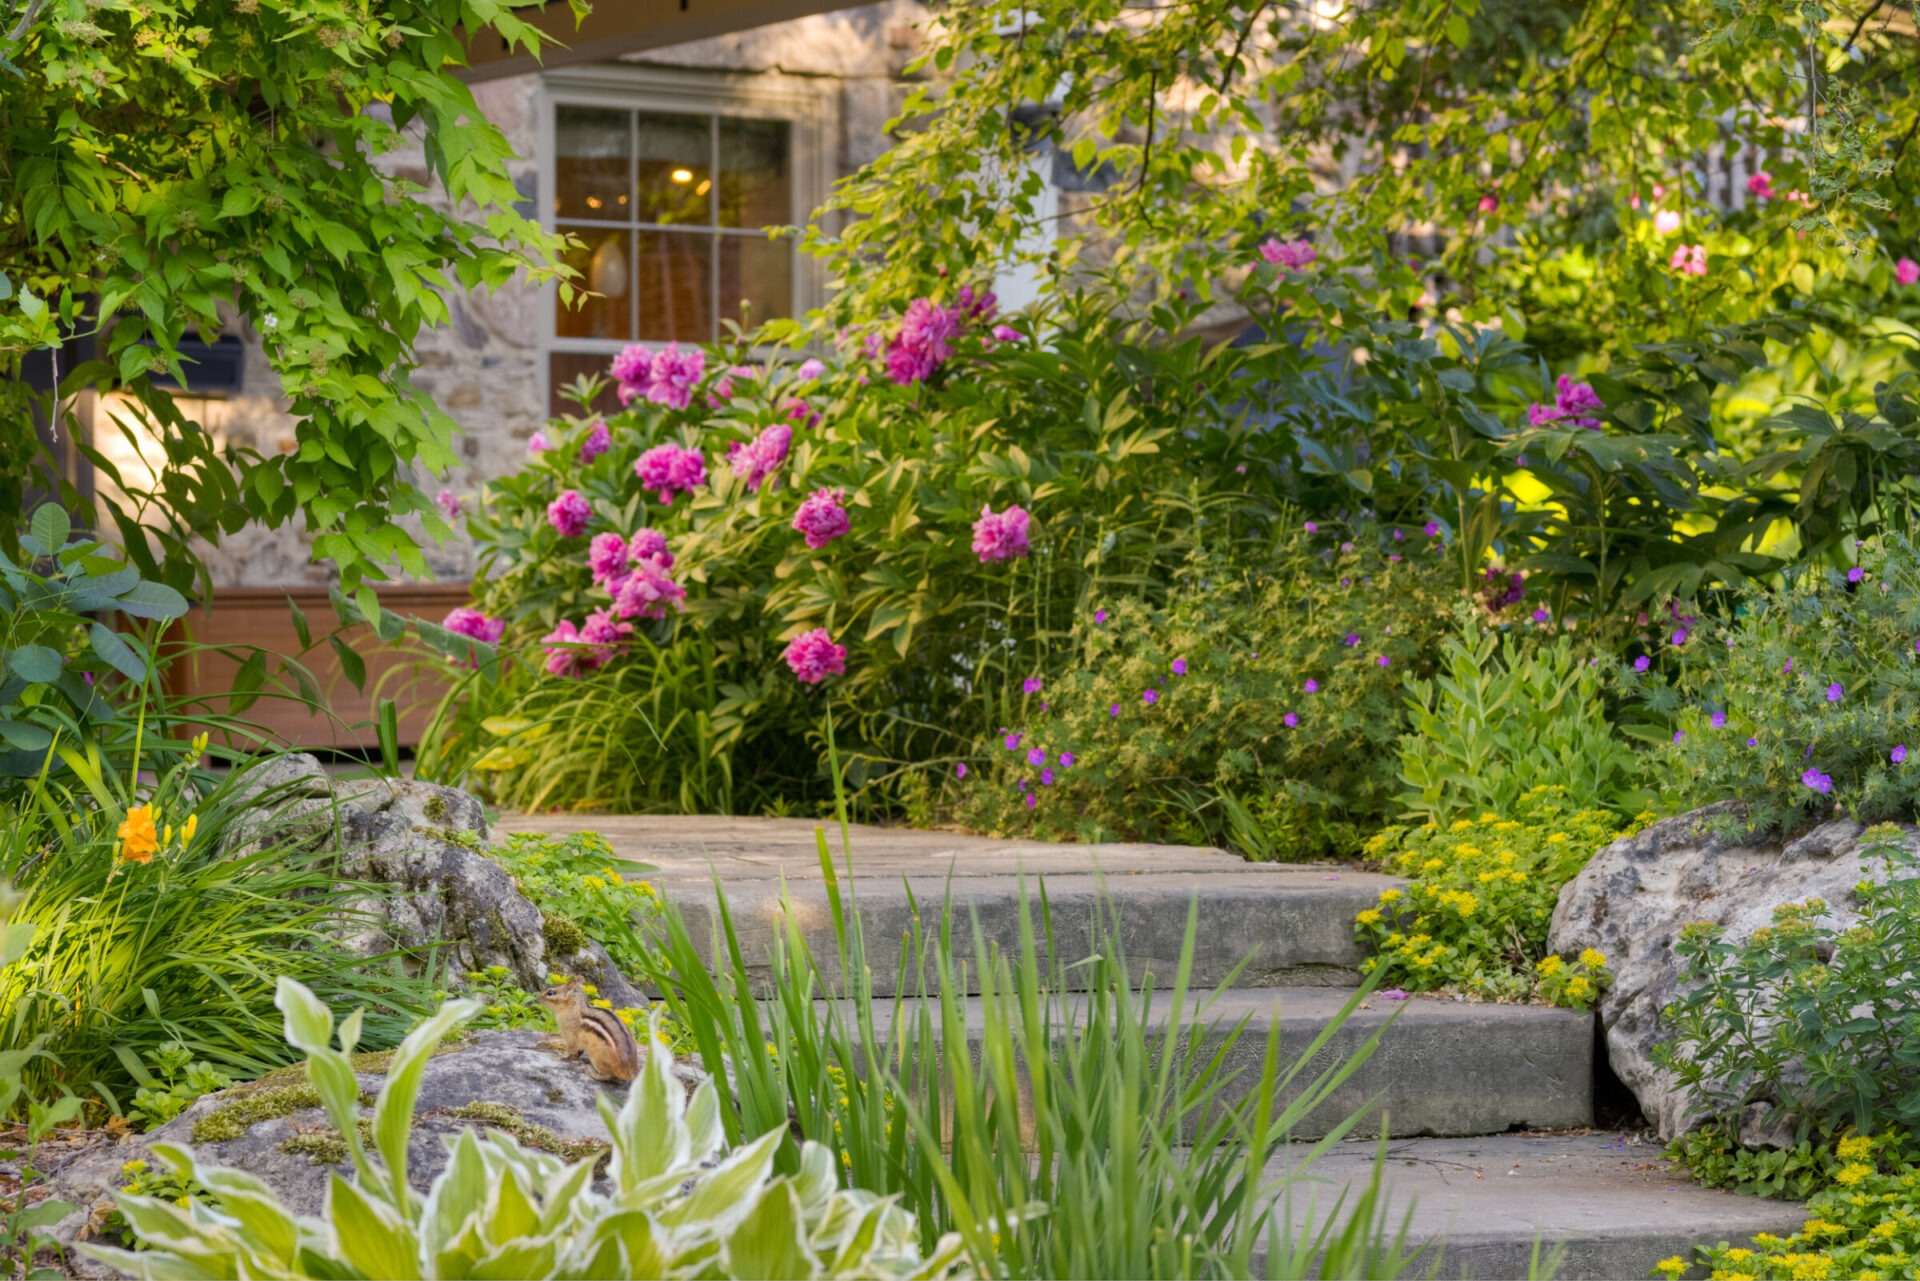 A serene garden with a variety of lush plants, blooming pink peonies, and stone steps leading to a quaint house partially hidden by foliage.